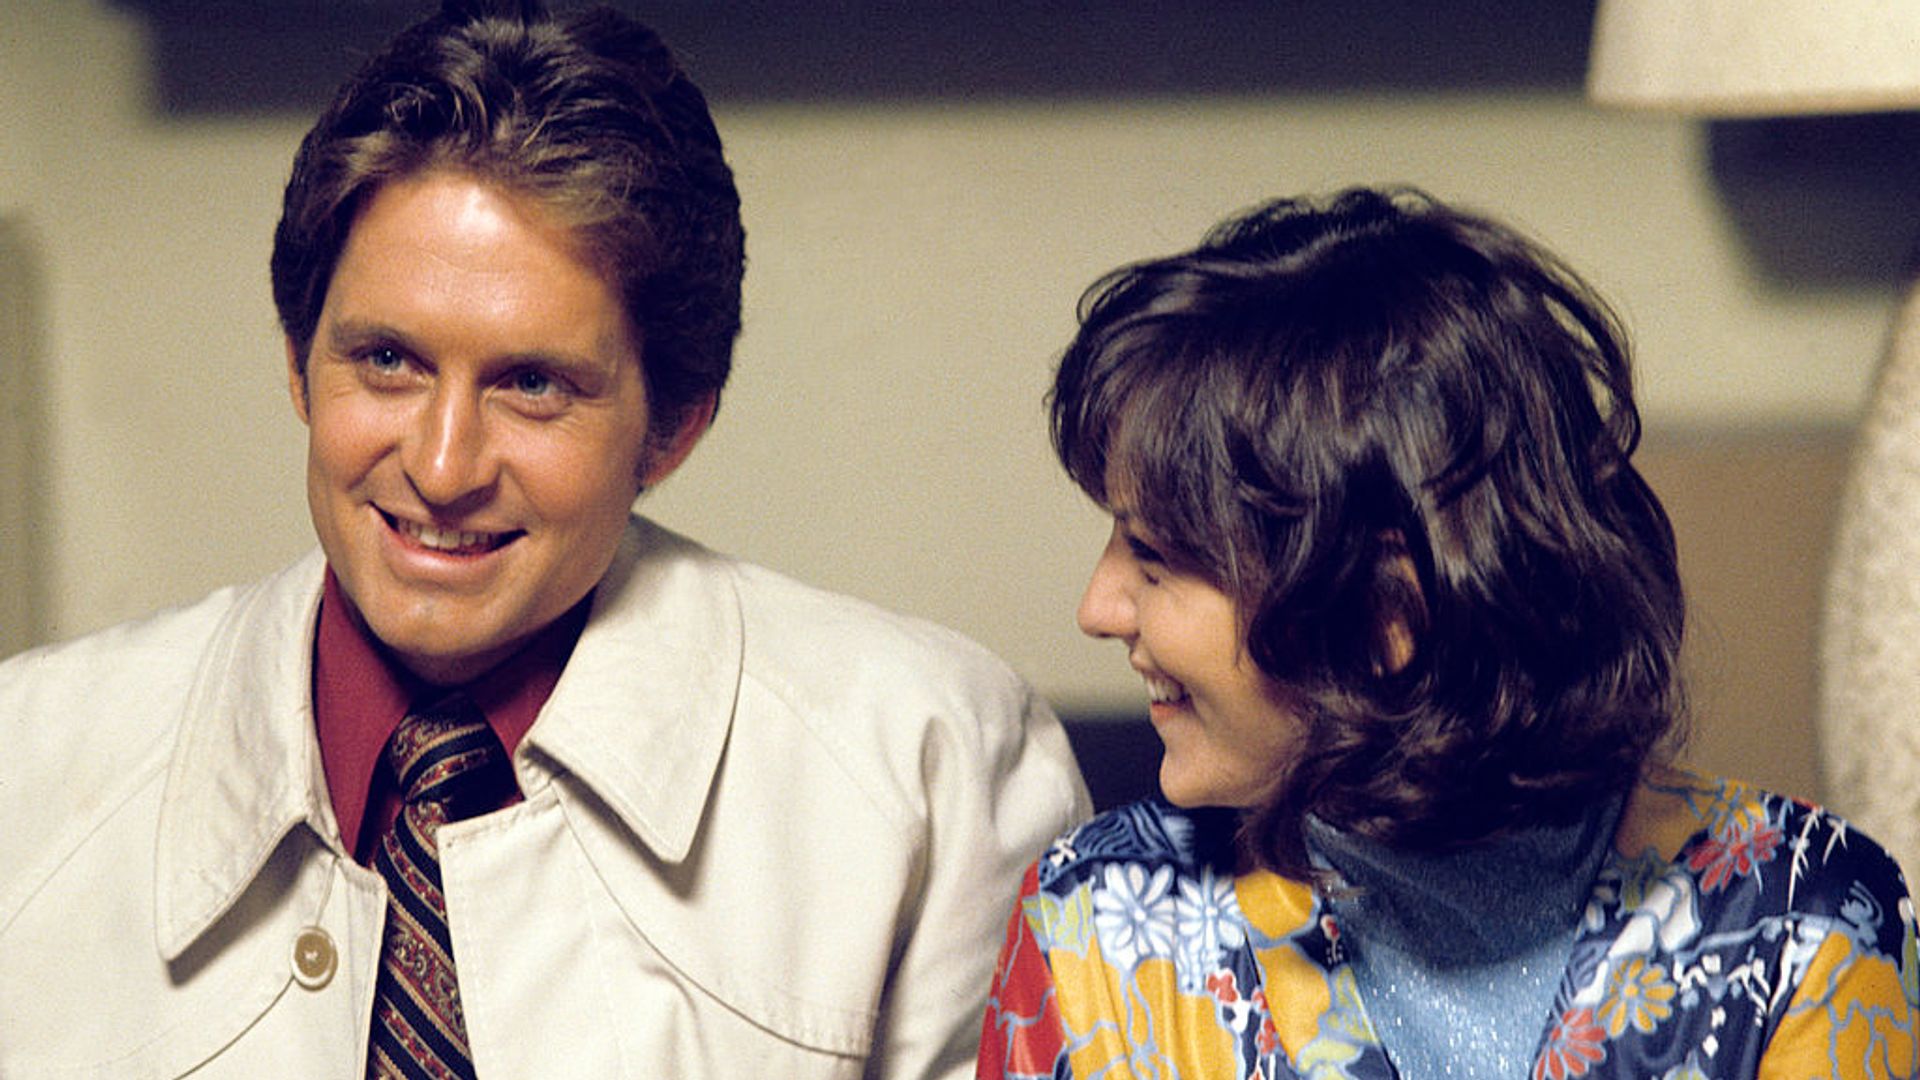 Michael Douglas and Brenda Vaccaro laughing together